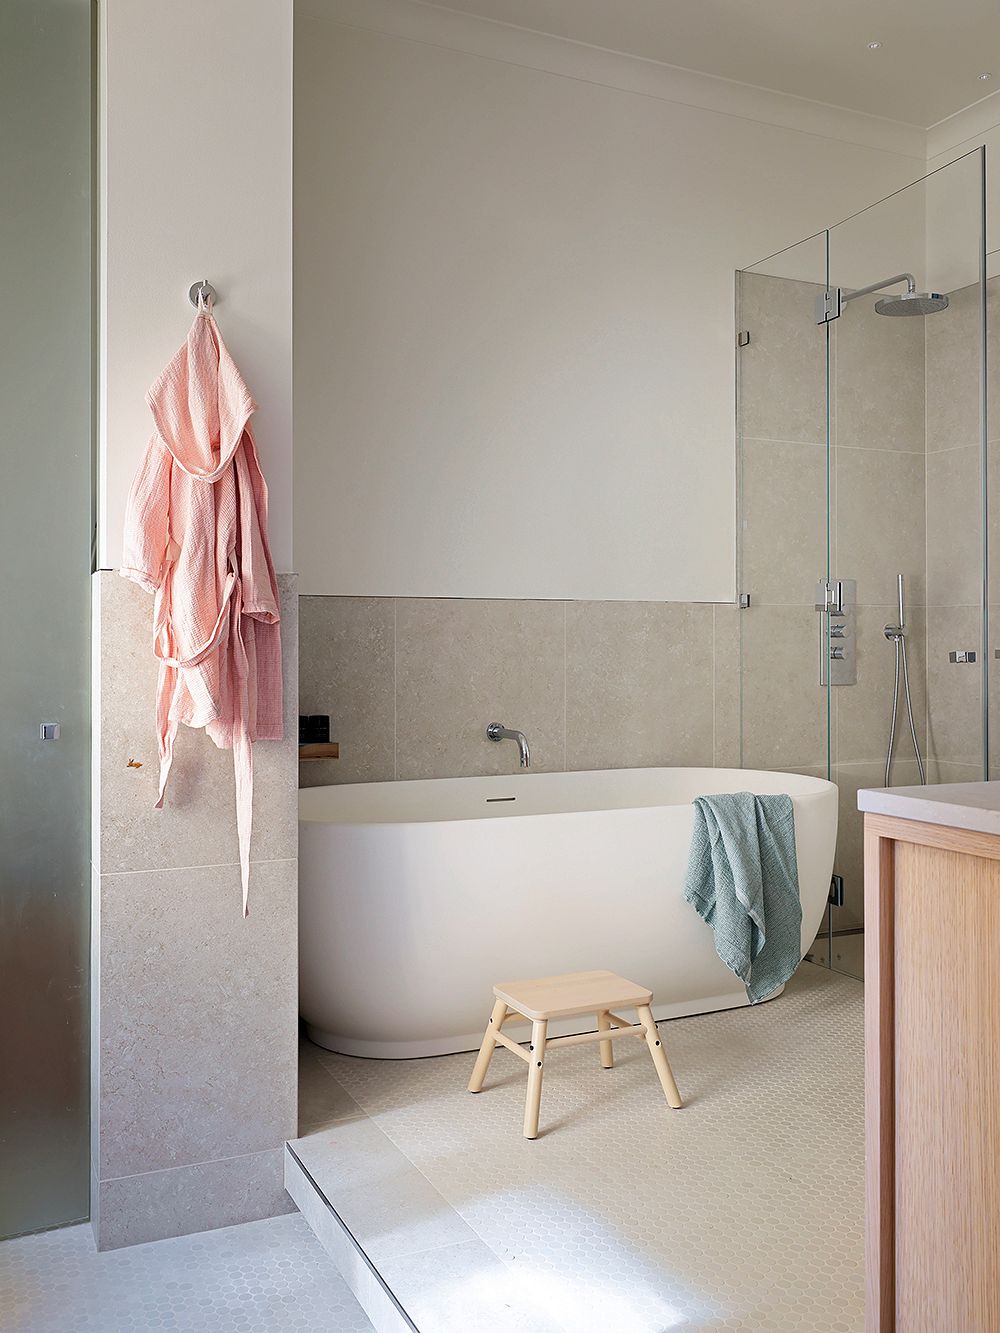 Neutral colors in the bathroom